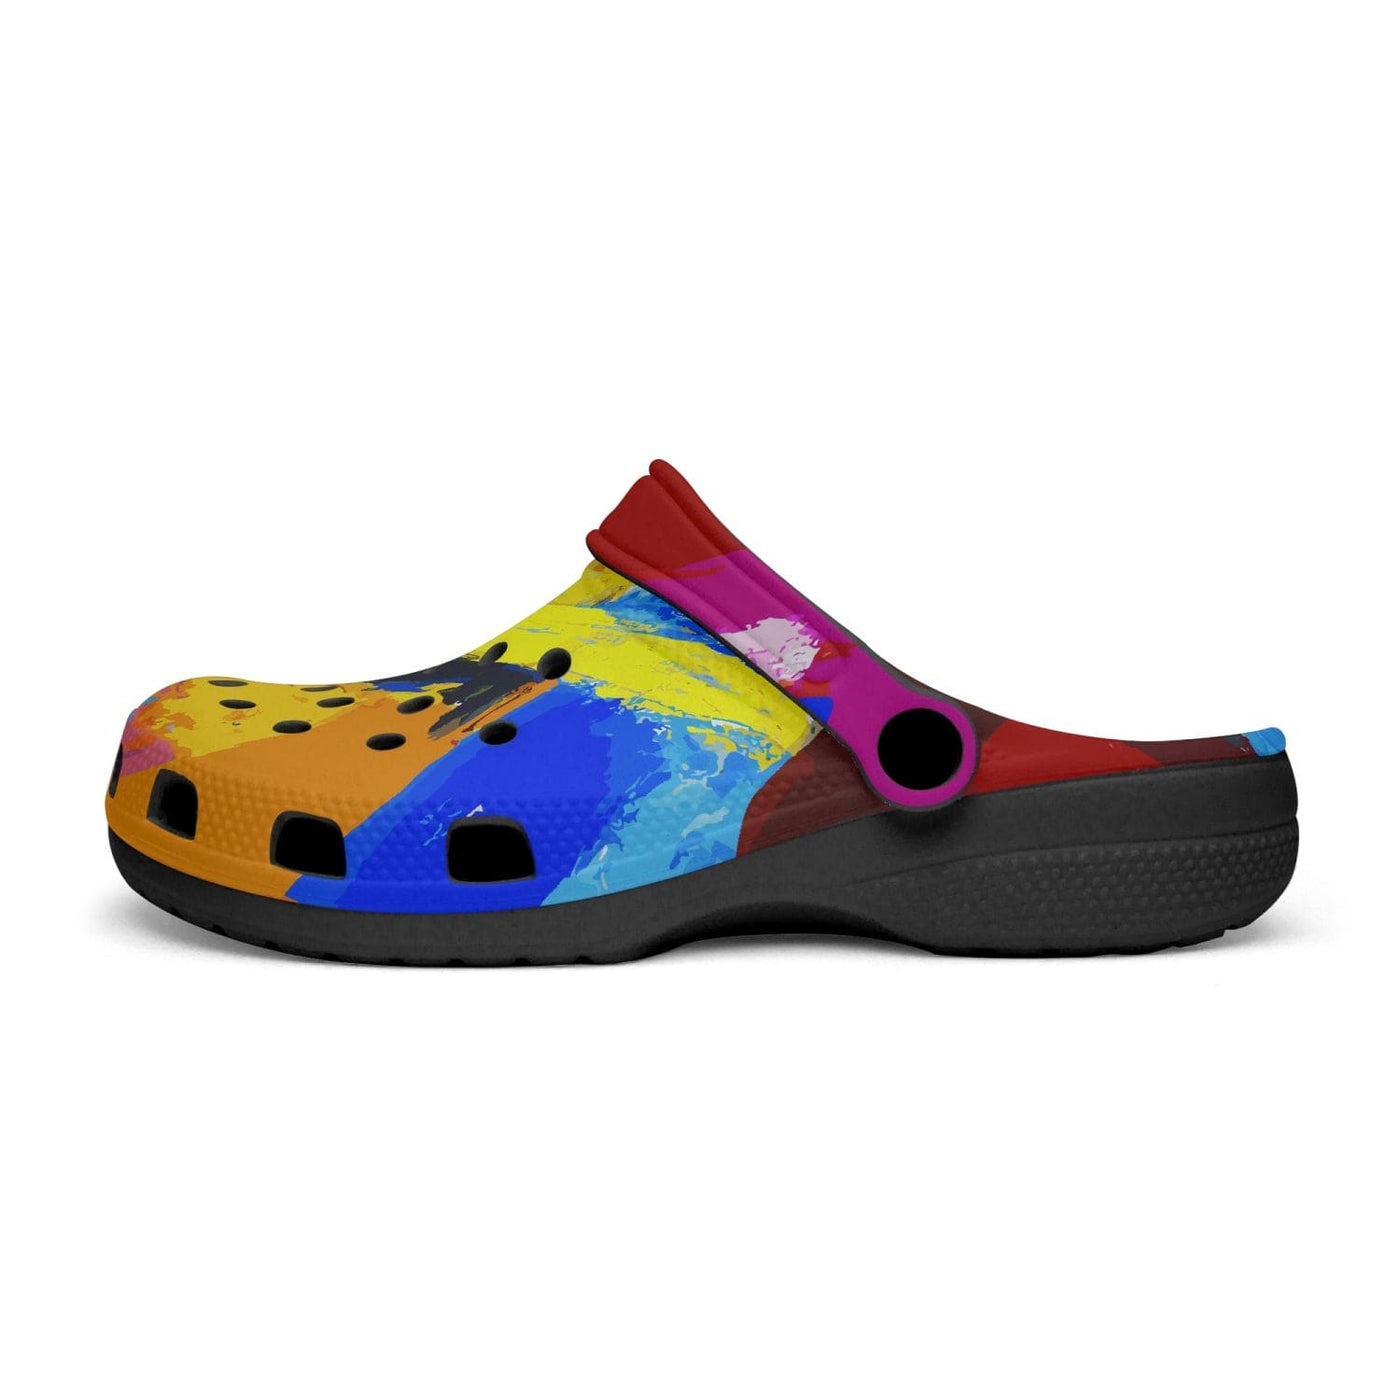 Adult Clog Shoes Multicolor Abstract Illustration Size 40 - Deals | Shoes